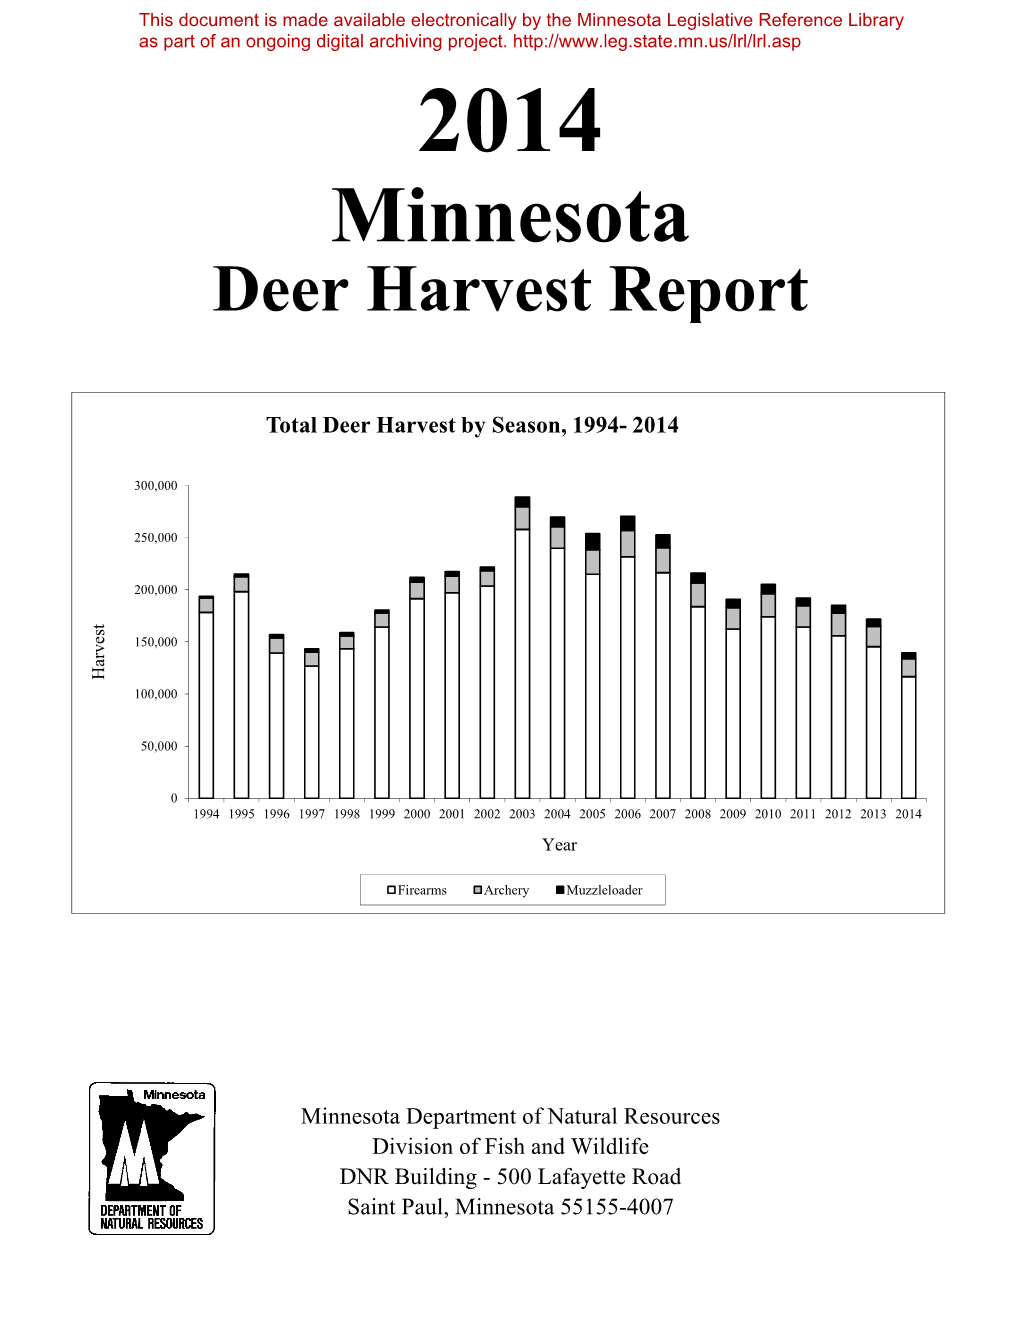 Minnesota Legislative Reference Library As Part of an Ongoing Digital Archiving Project